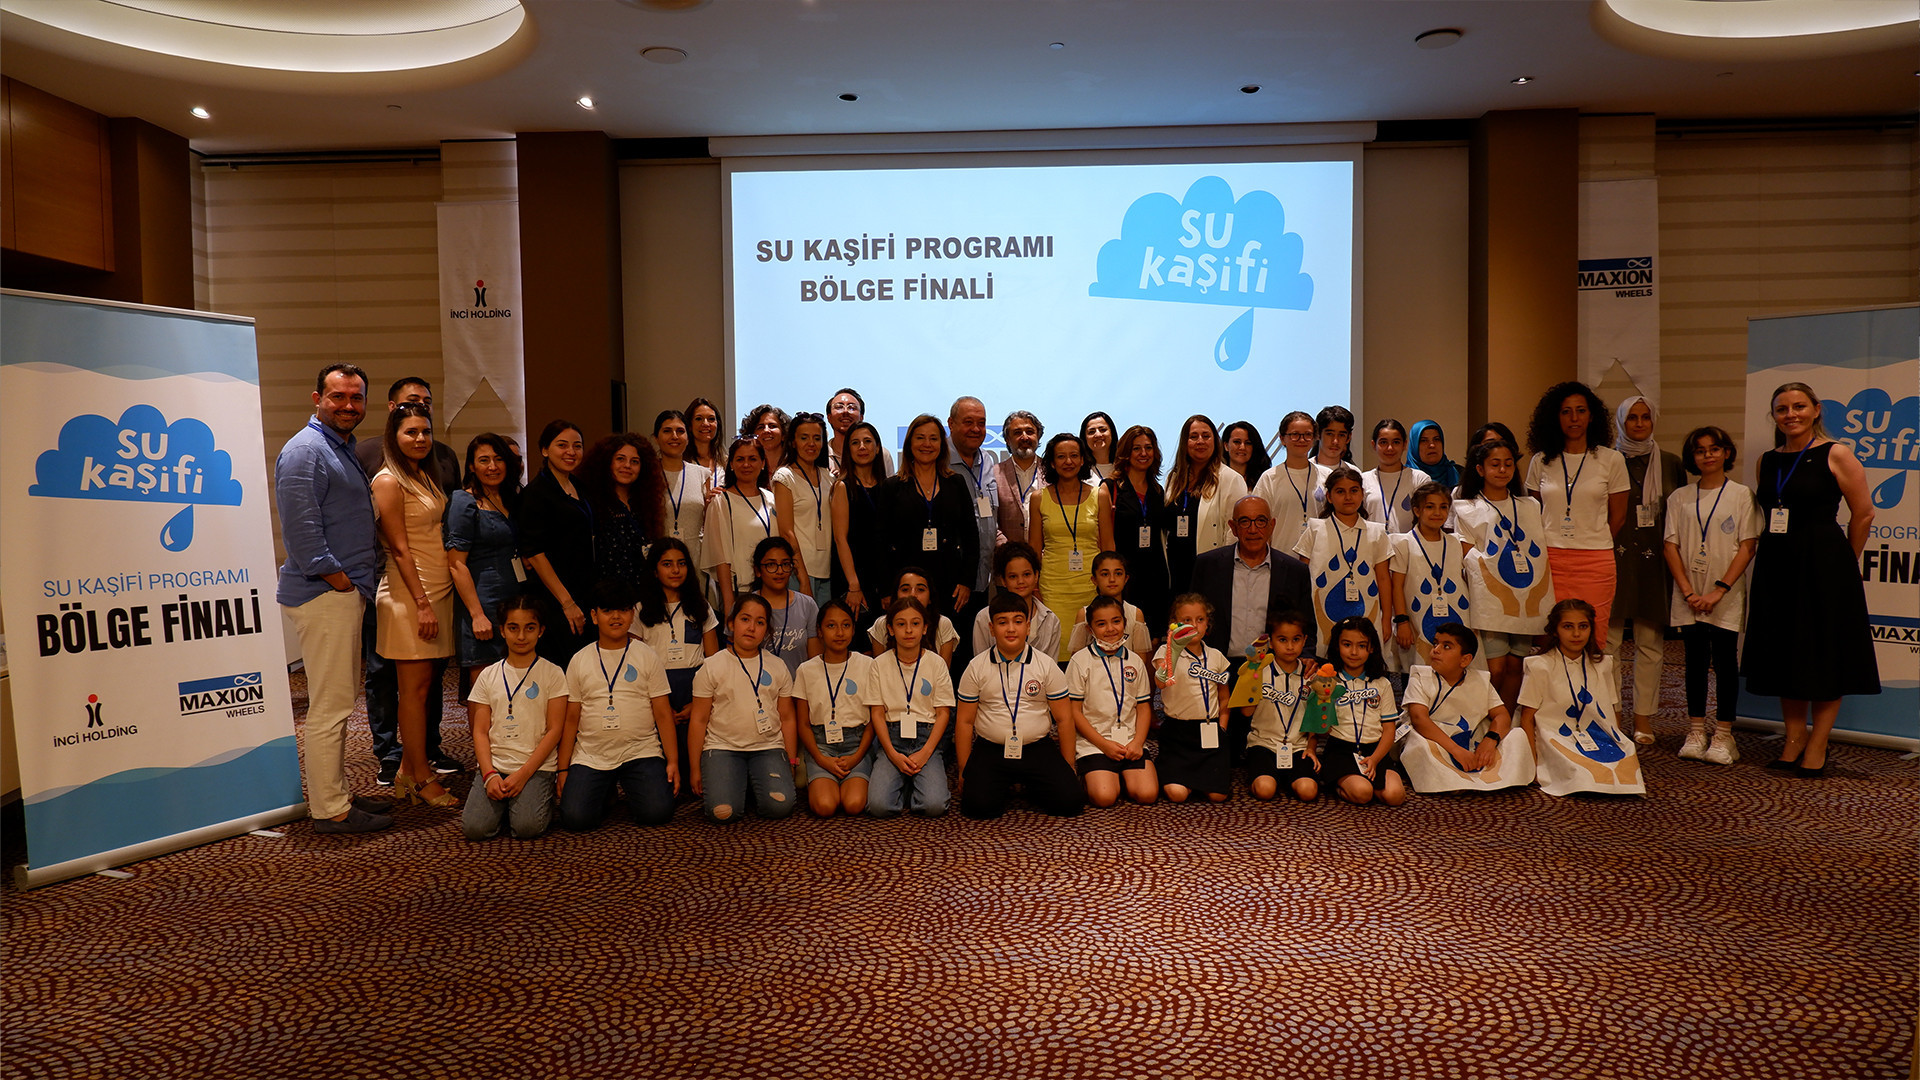 Water Explorers won hearts  at  Water Explorer Program, launched by Maxion İnci Wheel Group